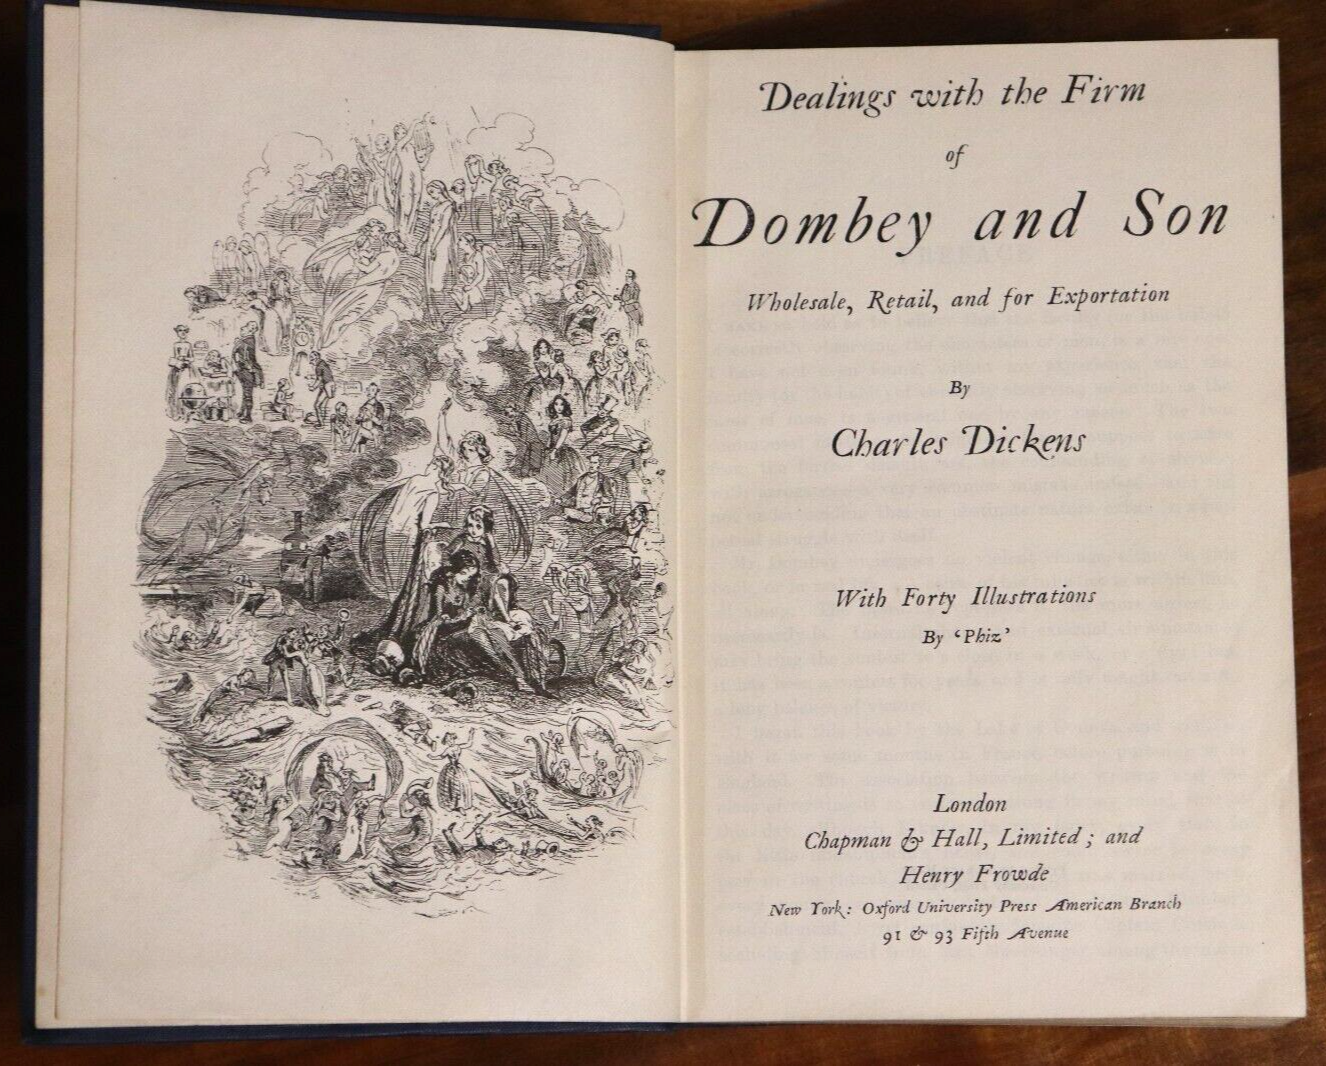 c1960 Dombey & Son by Charles Dickens Vintage Literature Book - 0